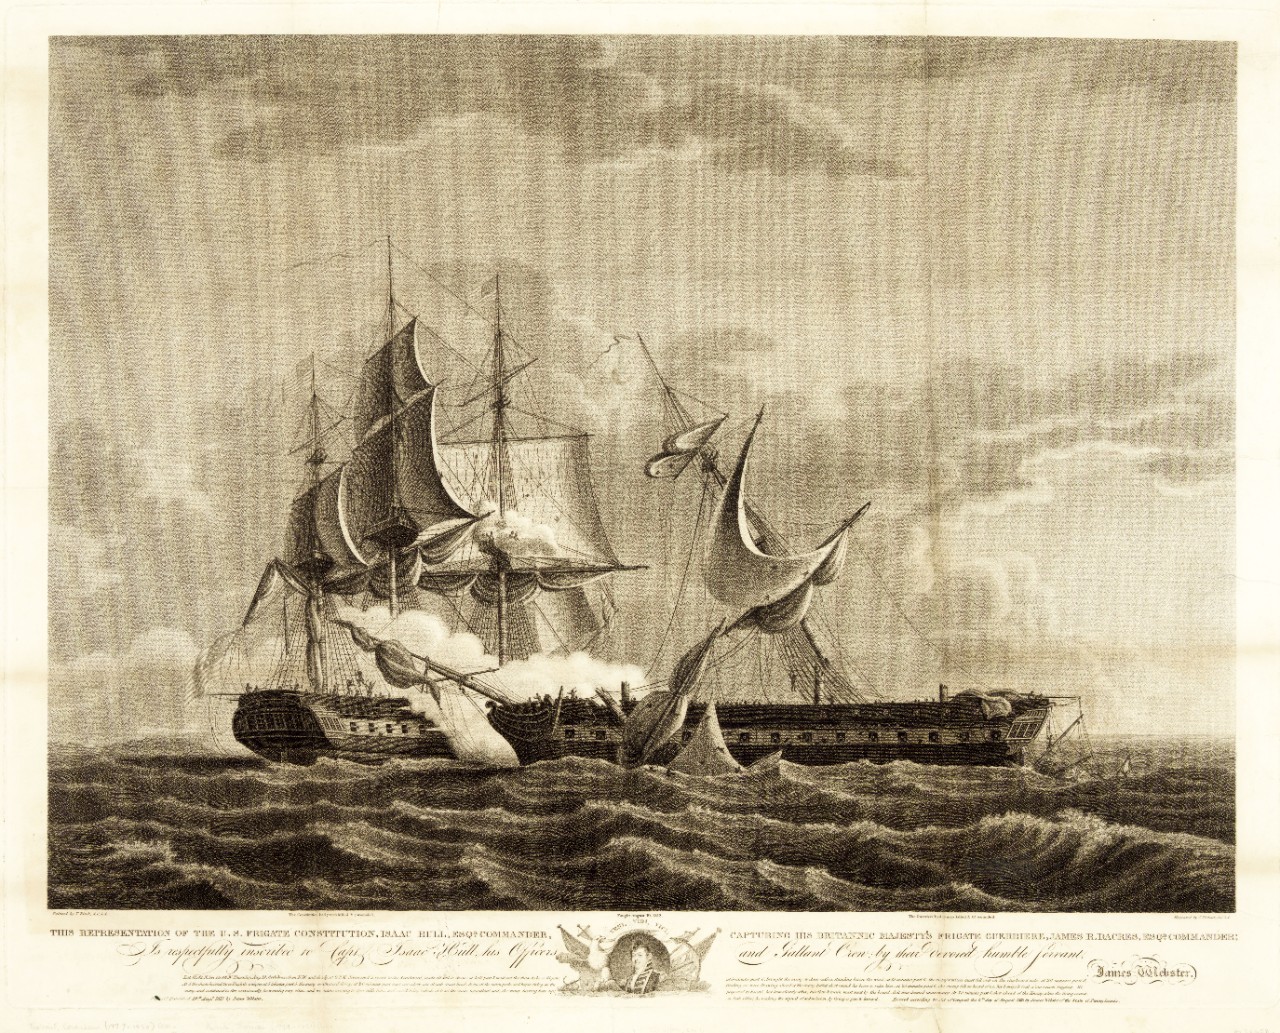 LC-DIG-PGA-02860:   USS Constitution, August 18, 1812.   War of 1812, U.S. Navy frigate, USS Constitution, commanded by Isaac Hull, capturing HBM frigate Guerriere,  August 19,  1812.   Engraving by Cornelius Teibout, based on artwork by Thomas Birch, published by James Webster, August 19, 1813. Courtesy of the Library of Congress.  (2015/7/2).  